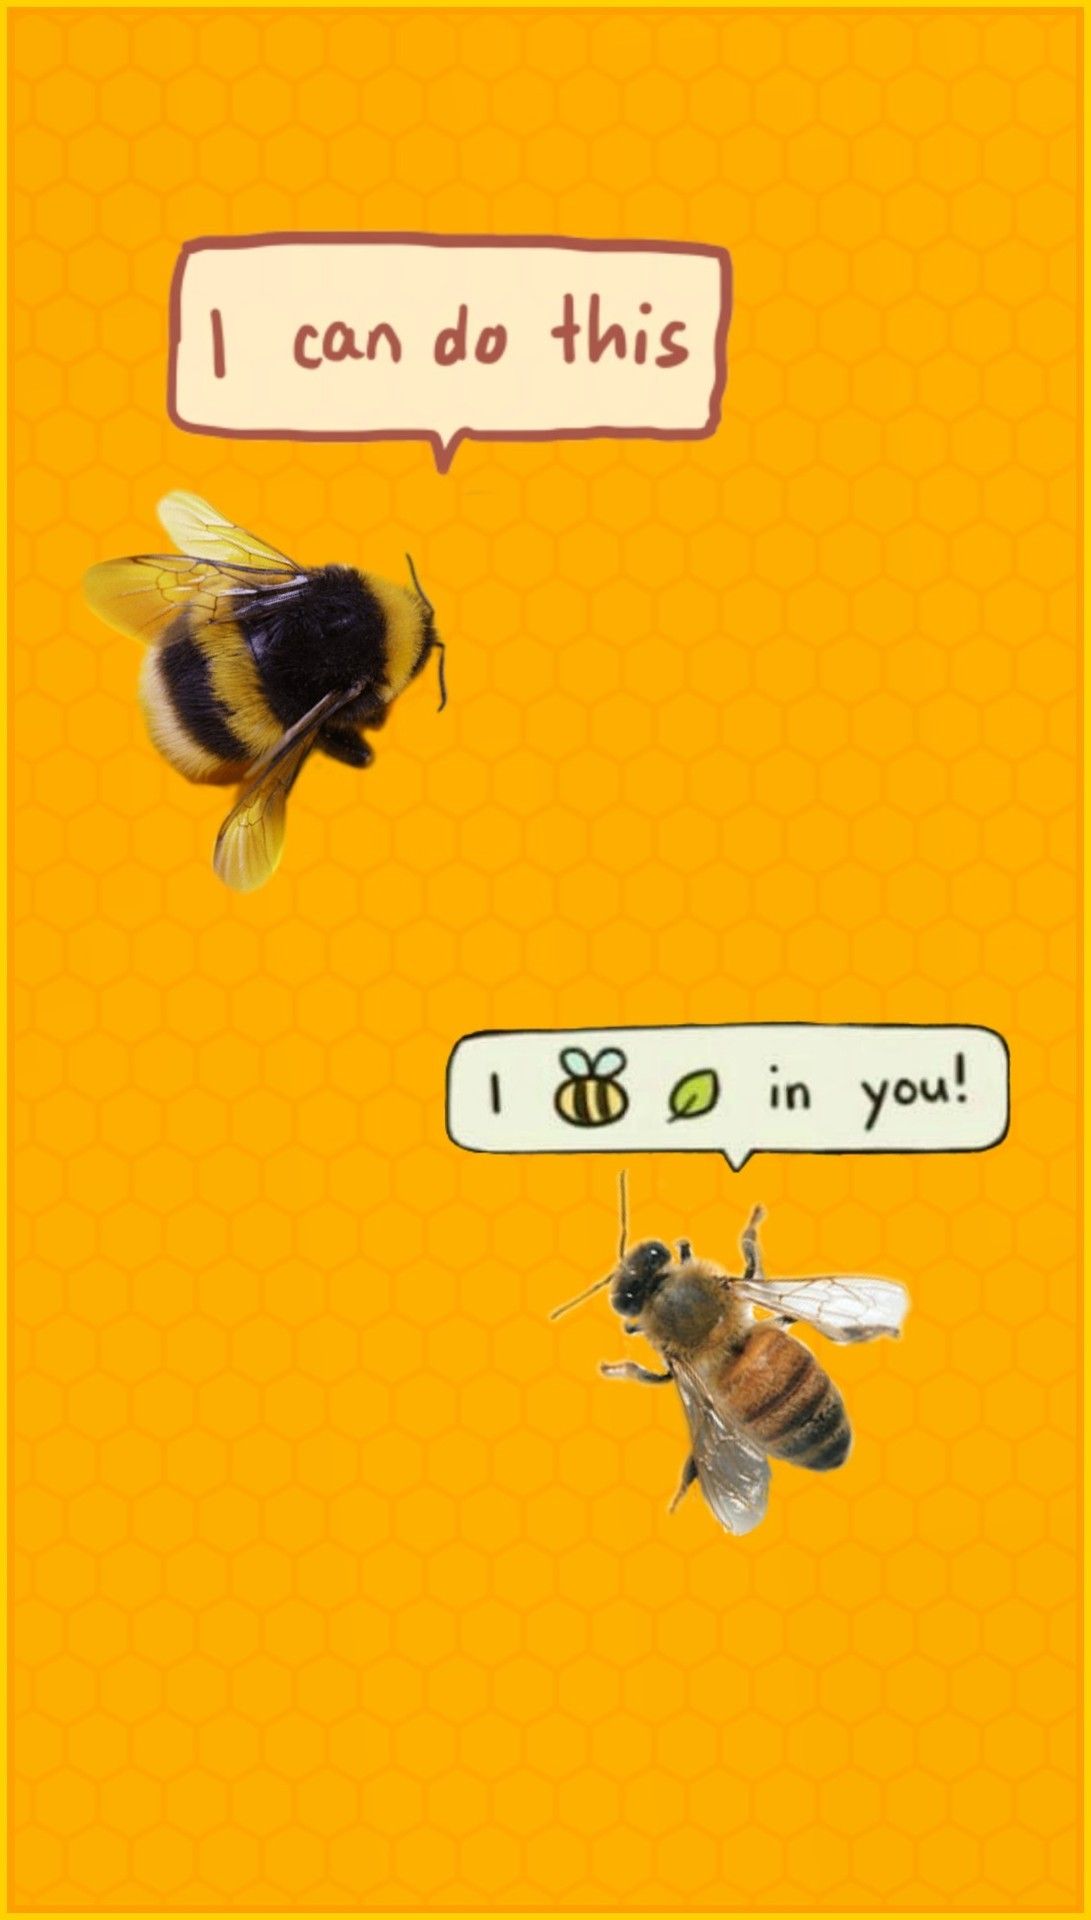 A bee says to another bee 